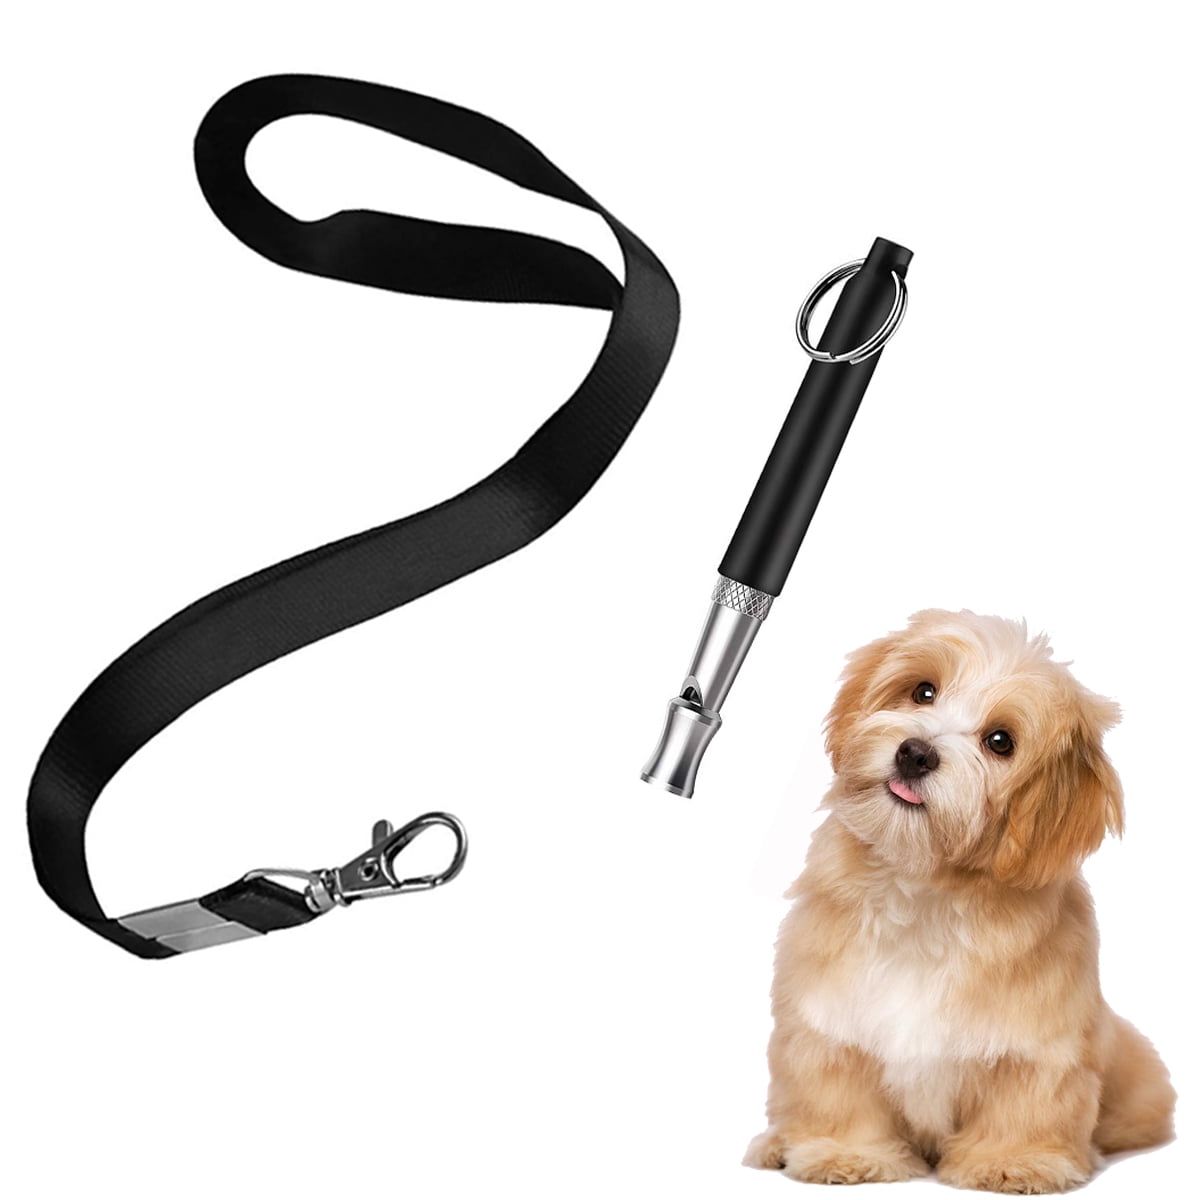 FATTERYU Genuine Ultrasonic Silent Dog Puppy Whistle Training and Behaviour Aid Pet Tools